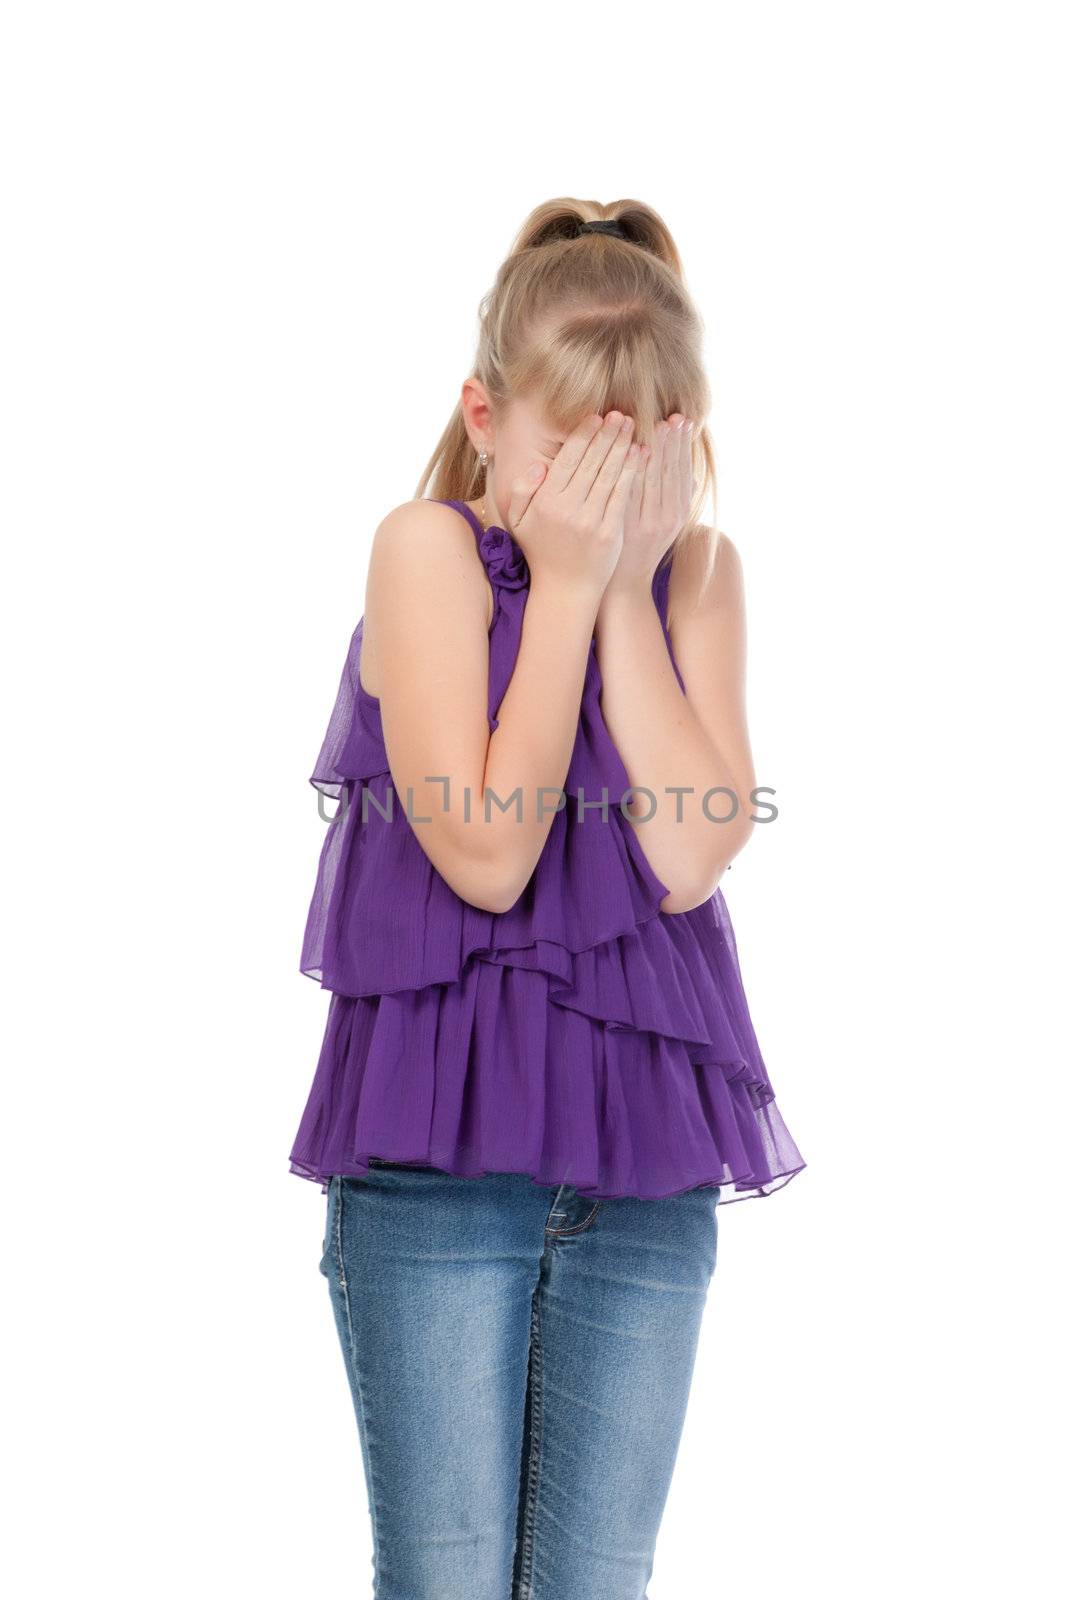 Young girl shyly covered her face with her hands by Discovod